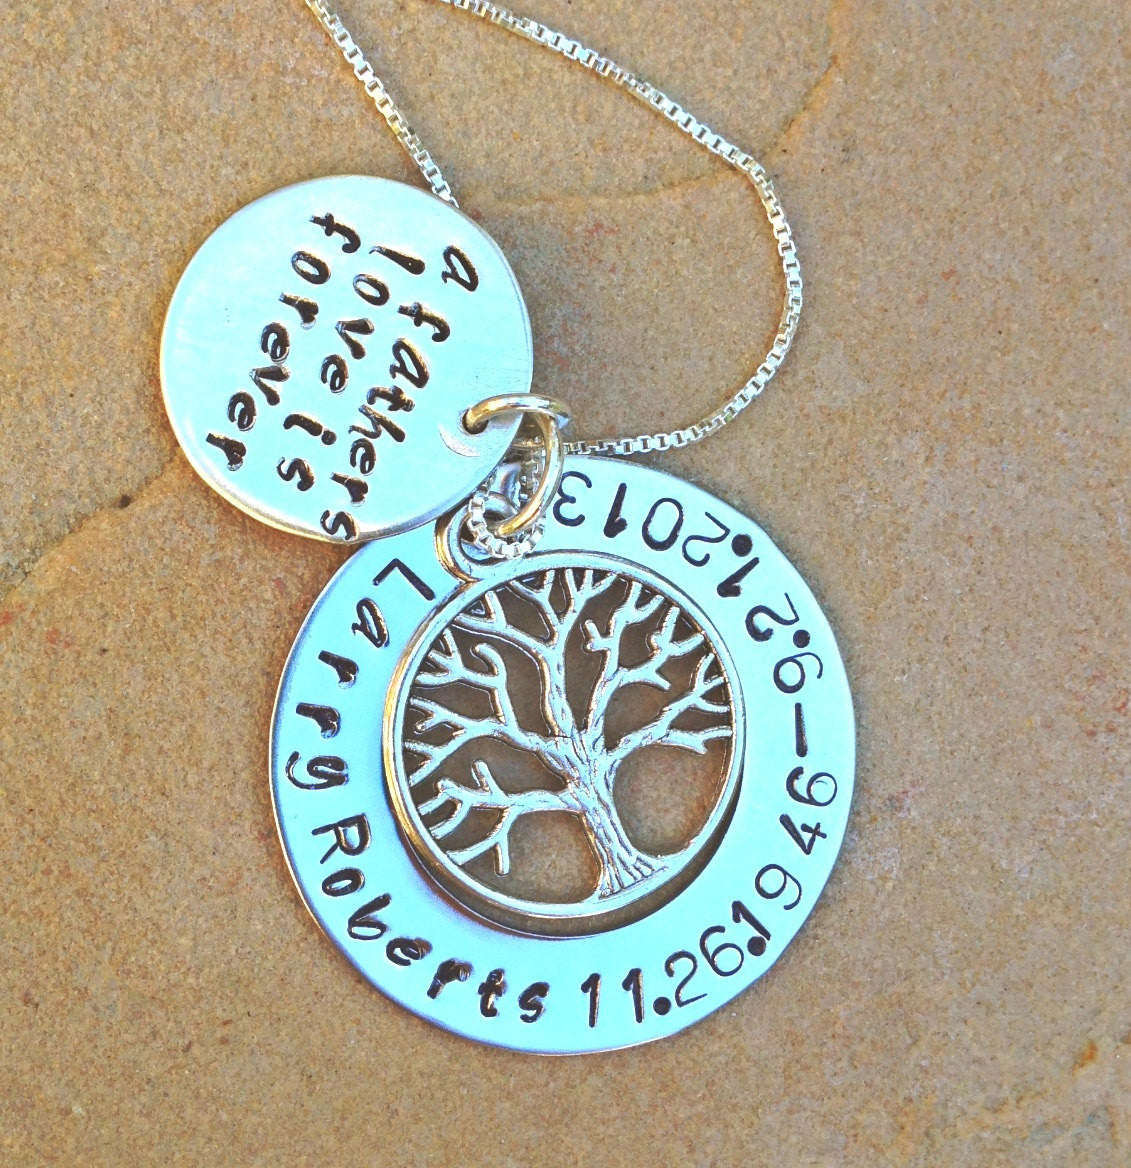 memorial necklace, rememberance necklace, tree of life necklace, loved one, loss - Natashaaloha, jewelry, bracelets, necklace, keychains, fishing lures, gifts for men, charms, personalized, 